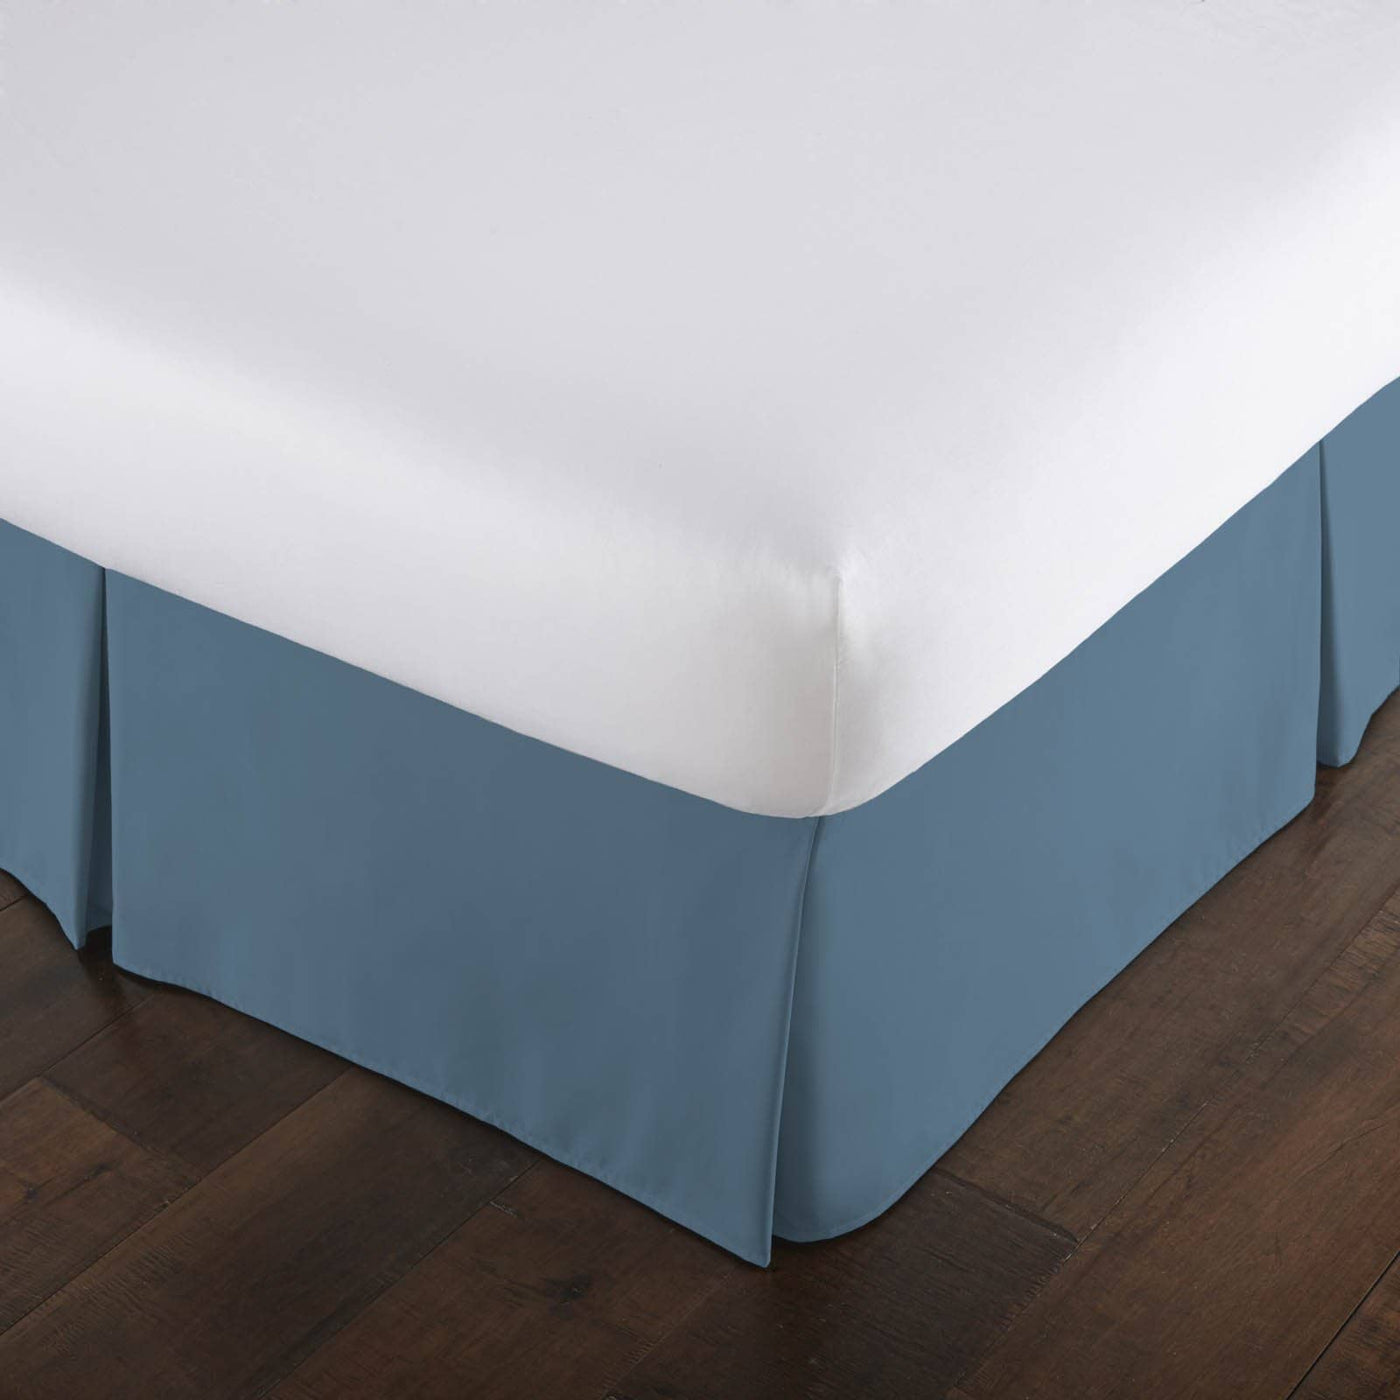 Ruffled Bed Skirt with Split Corners - Twin XL, White, 21 Inch Drop Cotton  Blend Dorm Bedskirt (Available in 14 Colors) - Blissford Dust Ruffle -  Walmart.com